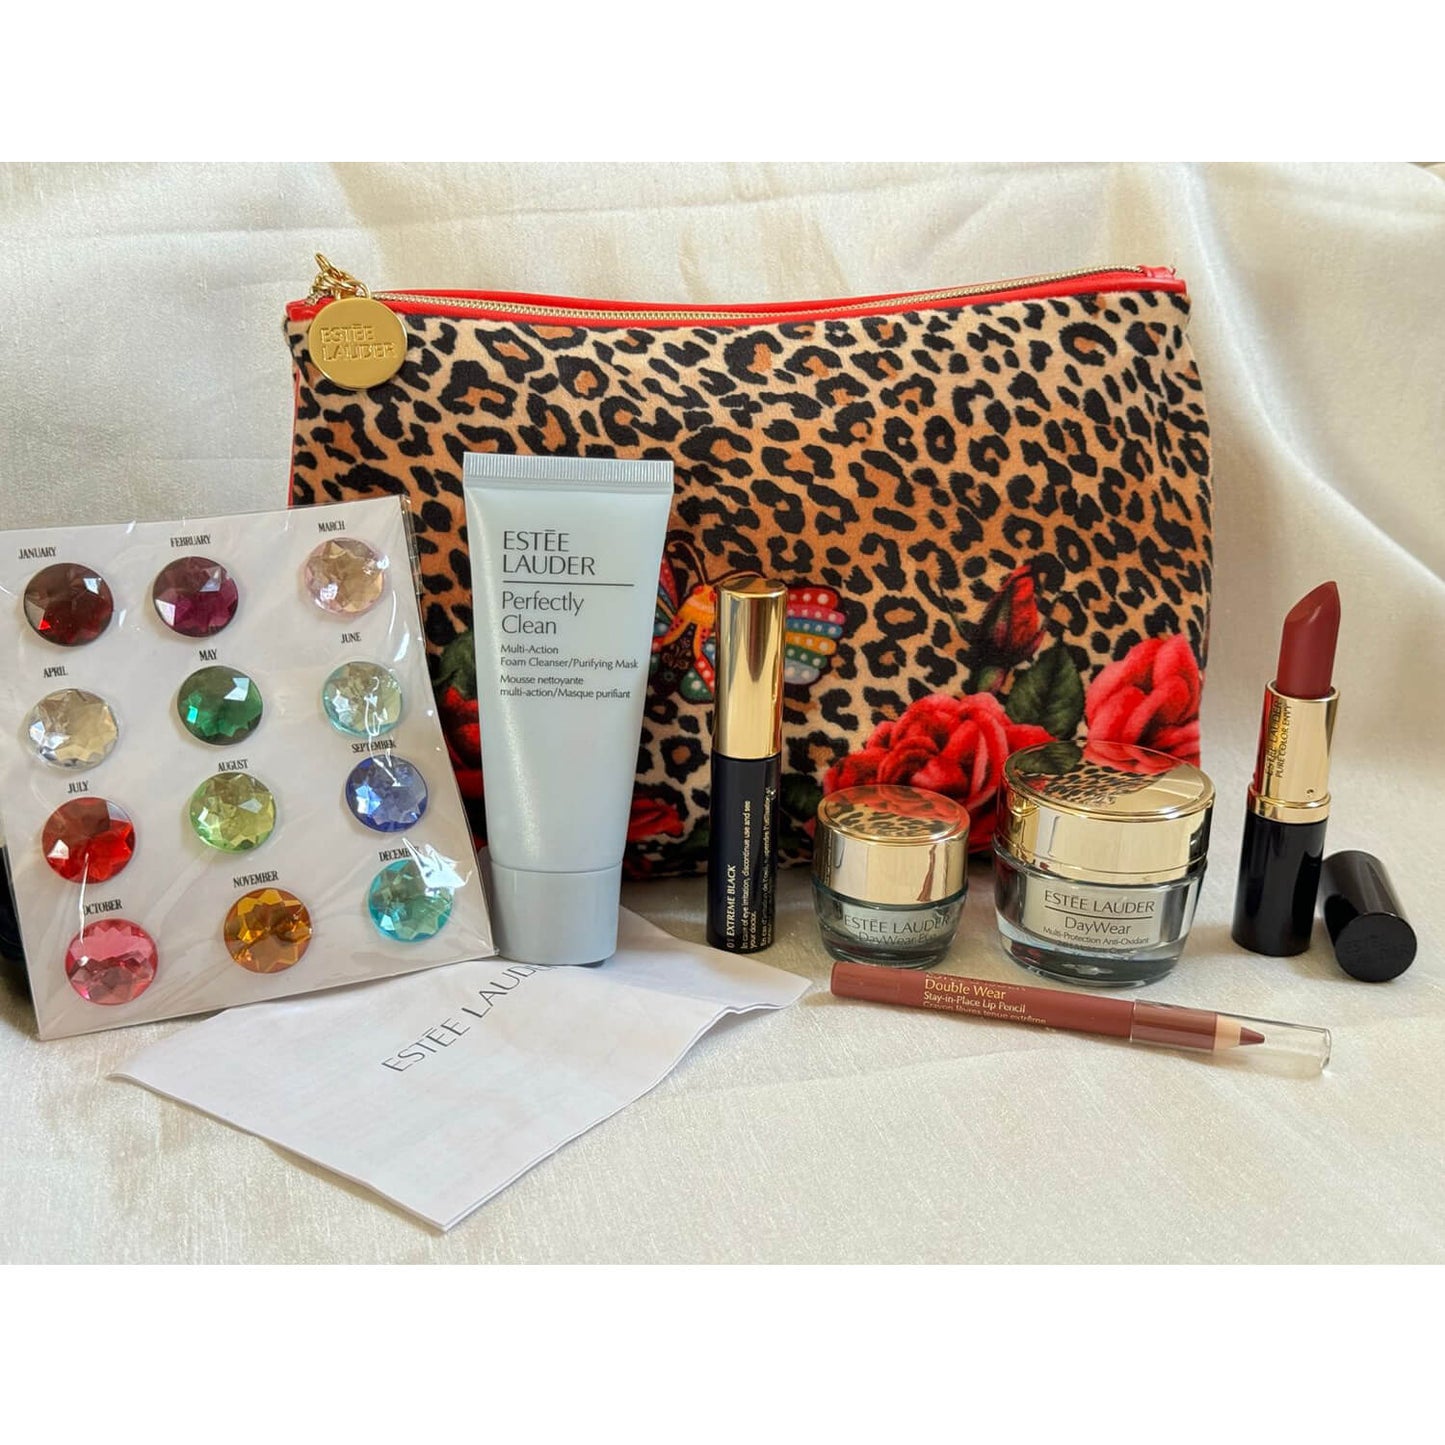 Shop Estee Lauder makeup and skincare gift set for her available at Heygirl.pk for delivery in Pakistan